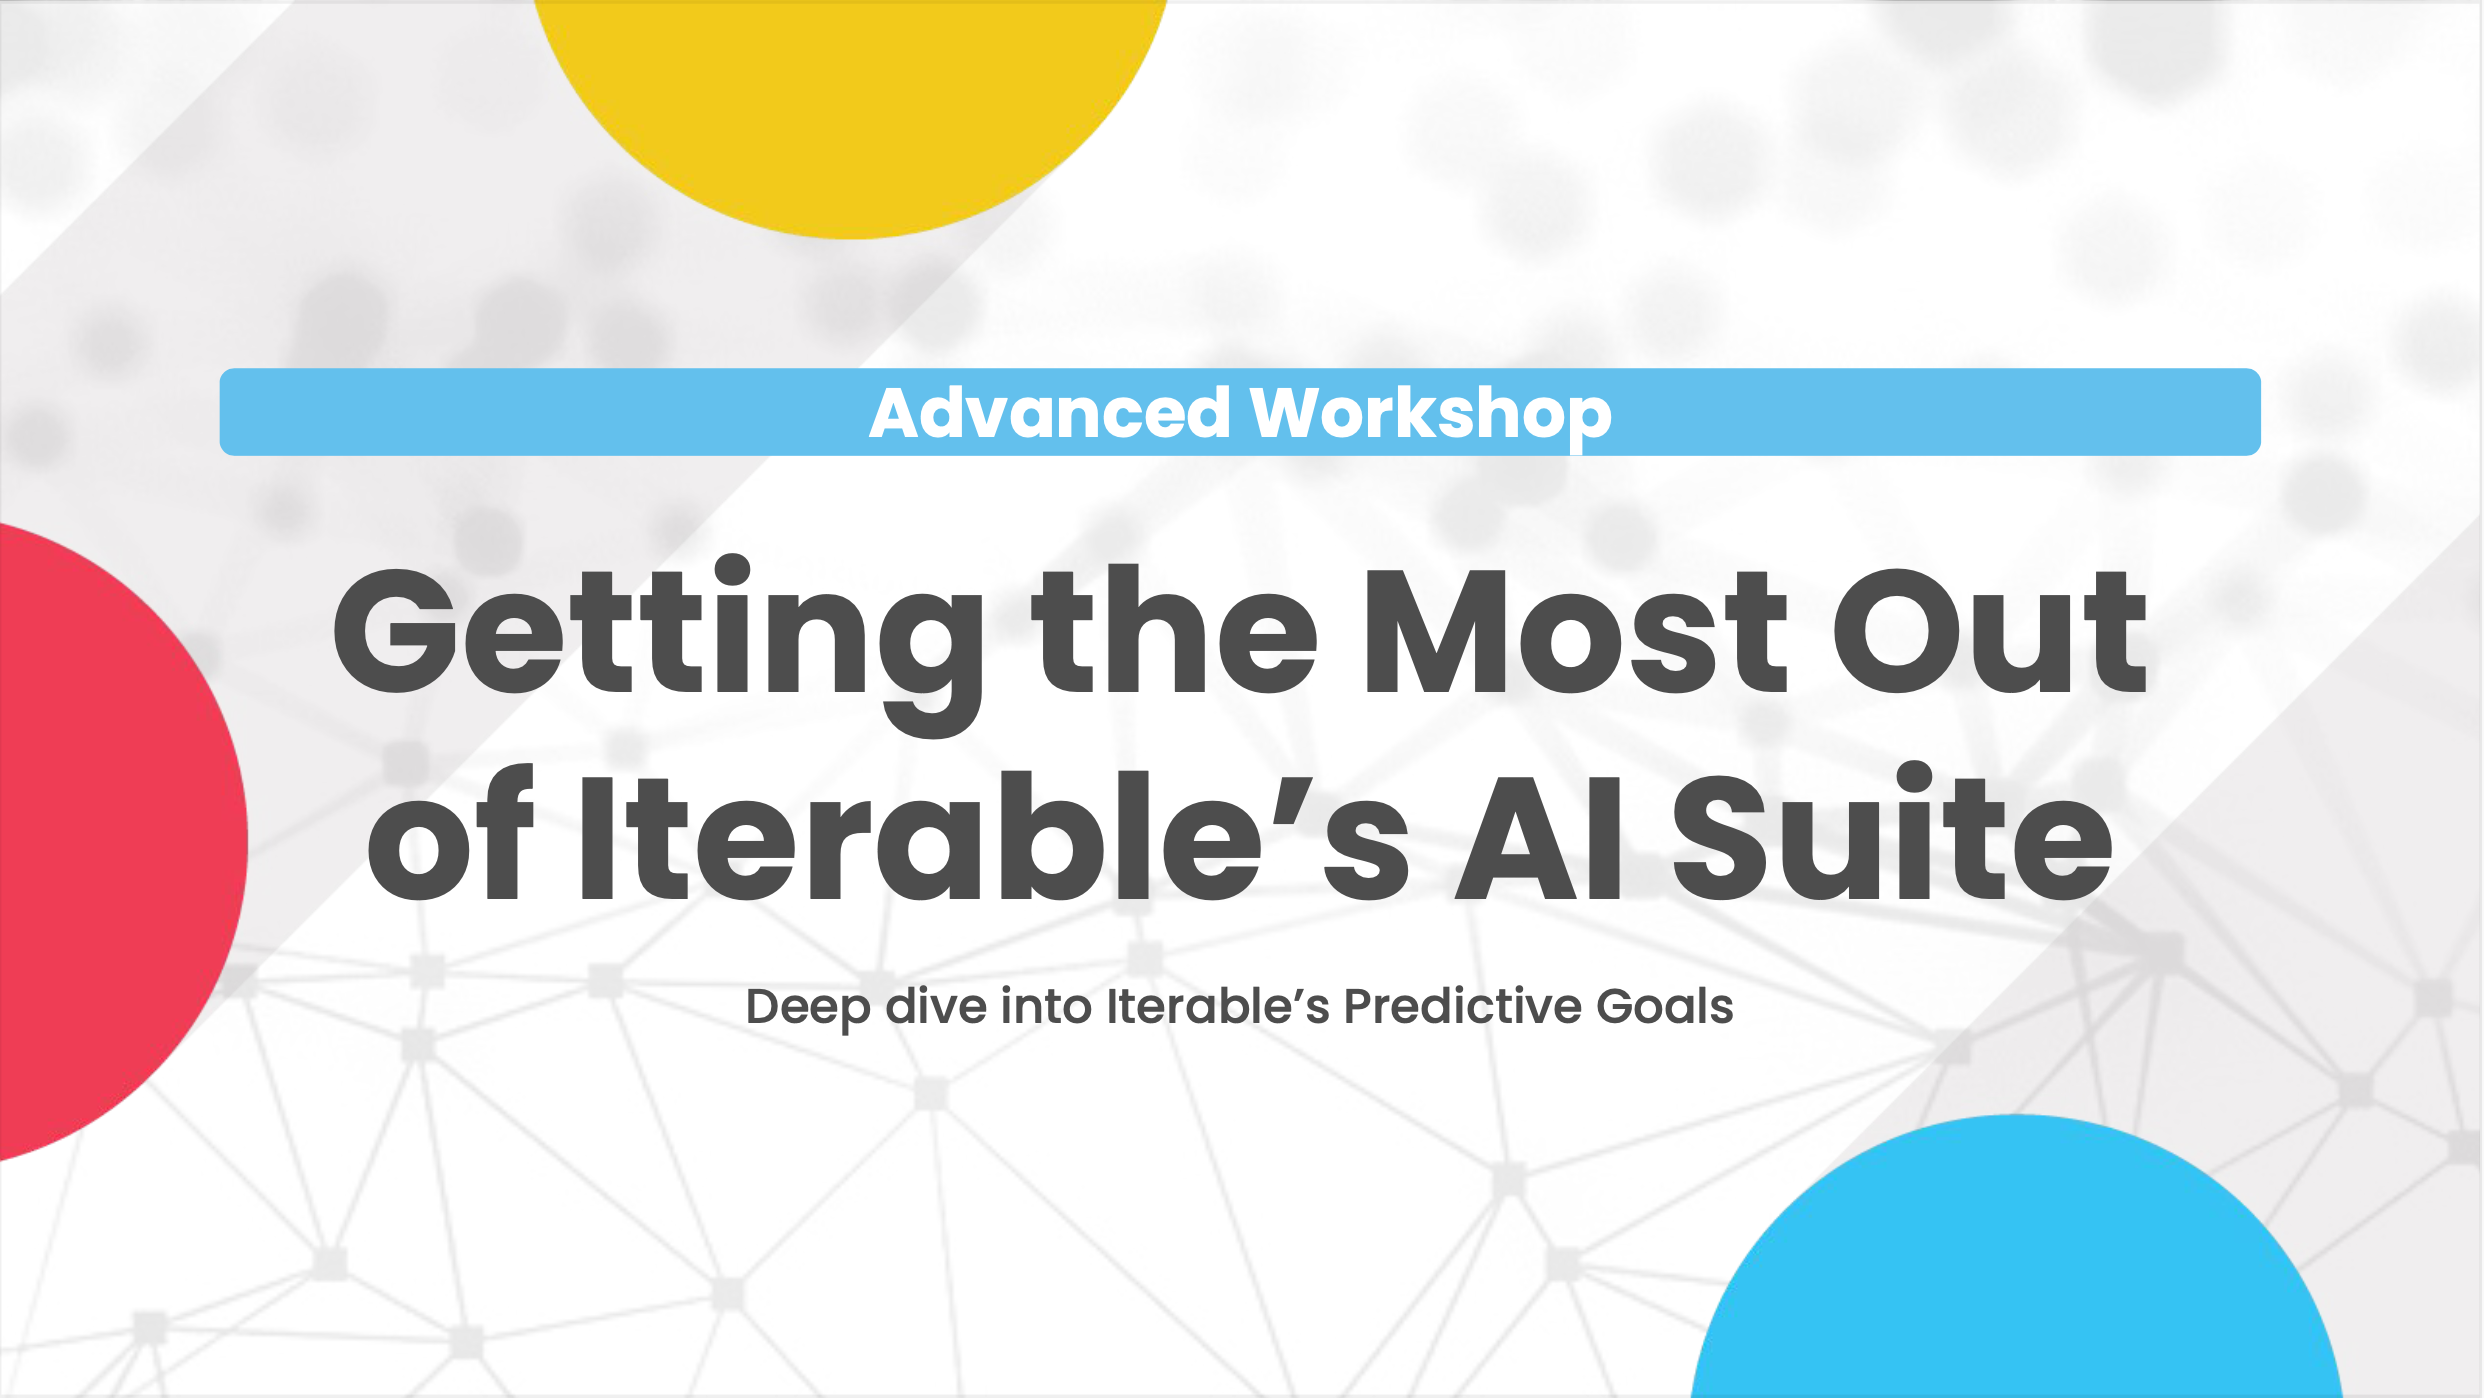 Iterable’s AI suite: Strategies for optimal set-up, launch, and ongoing AI management